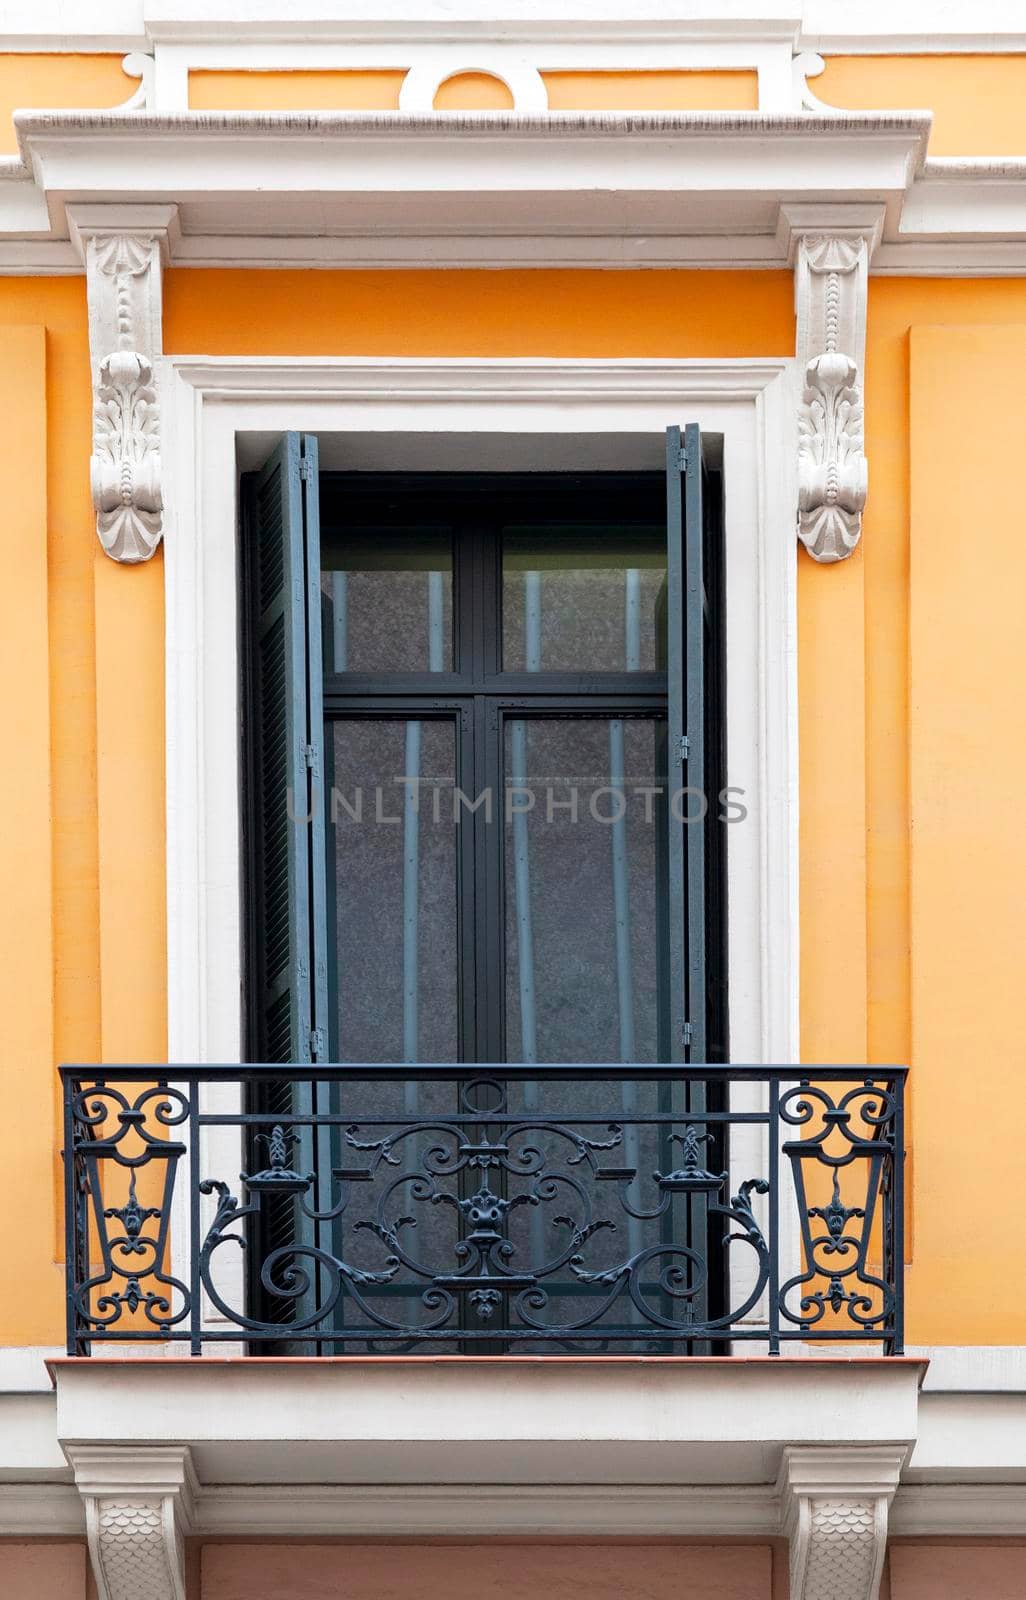 Ornate window of an old building by Goodday